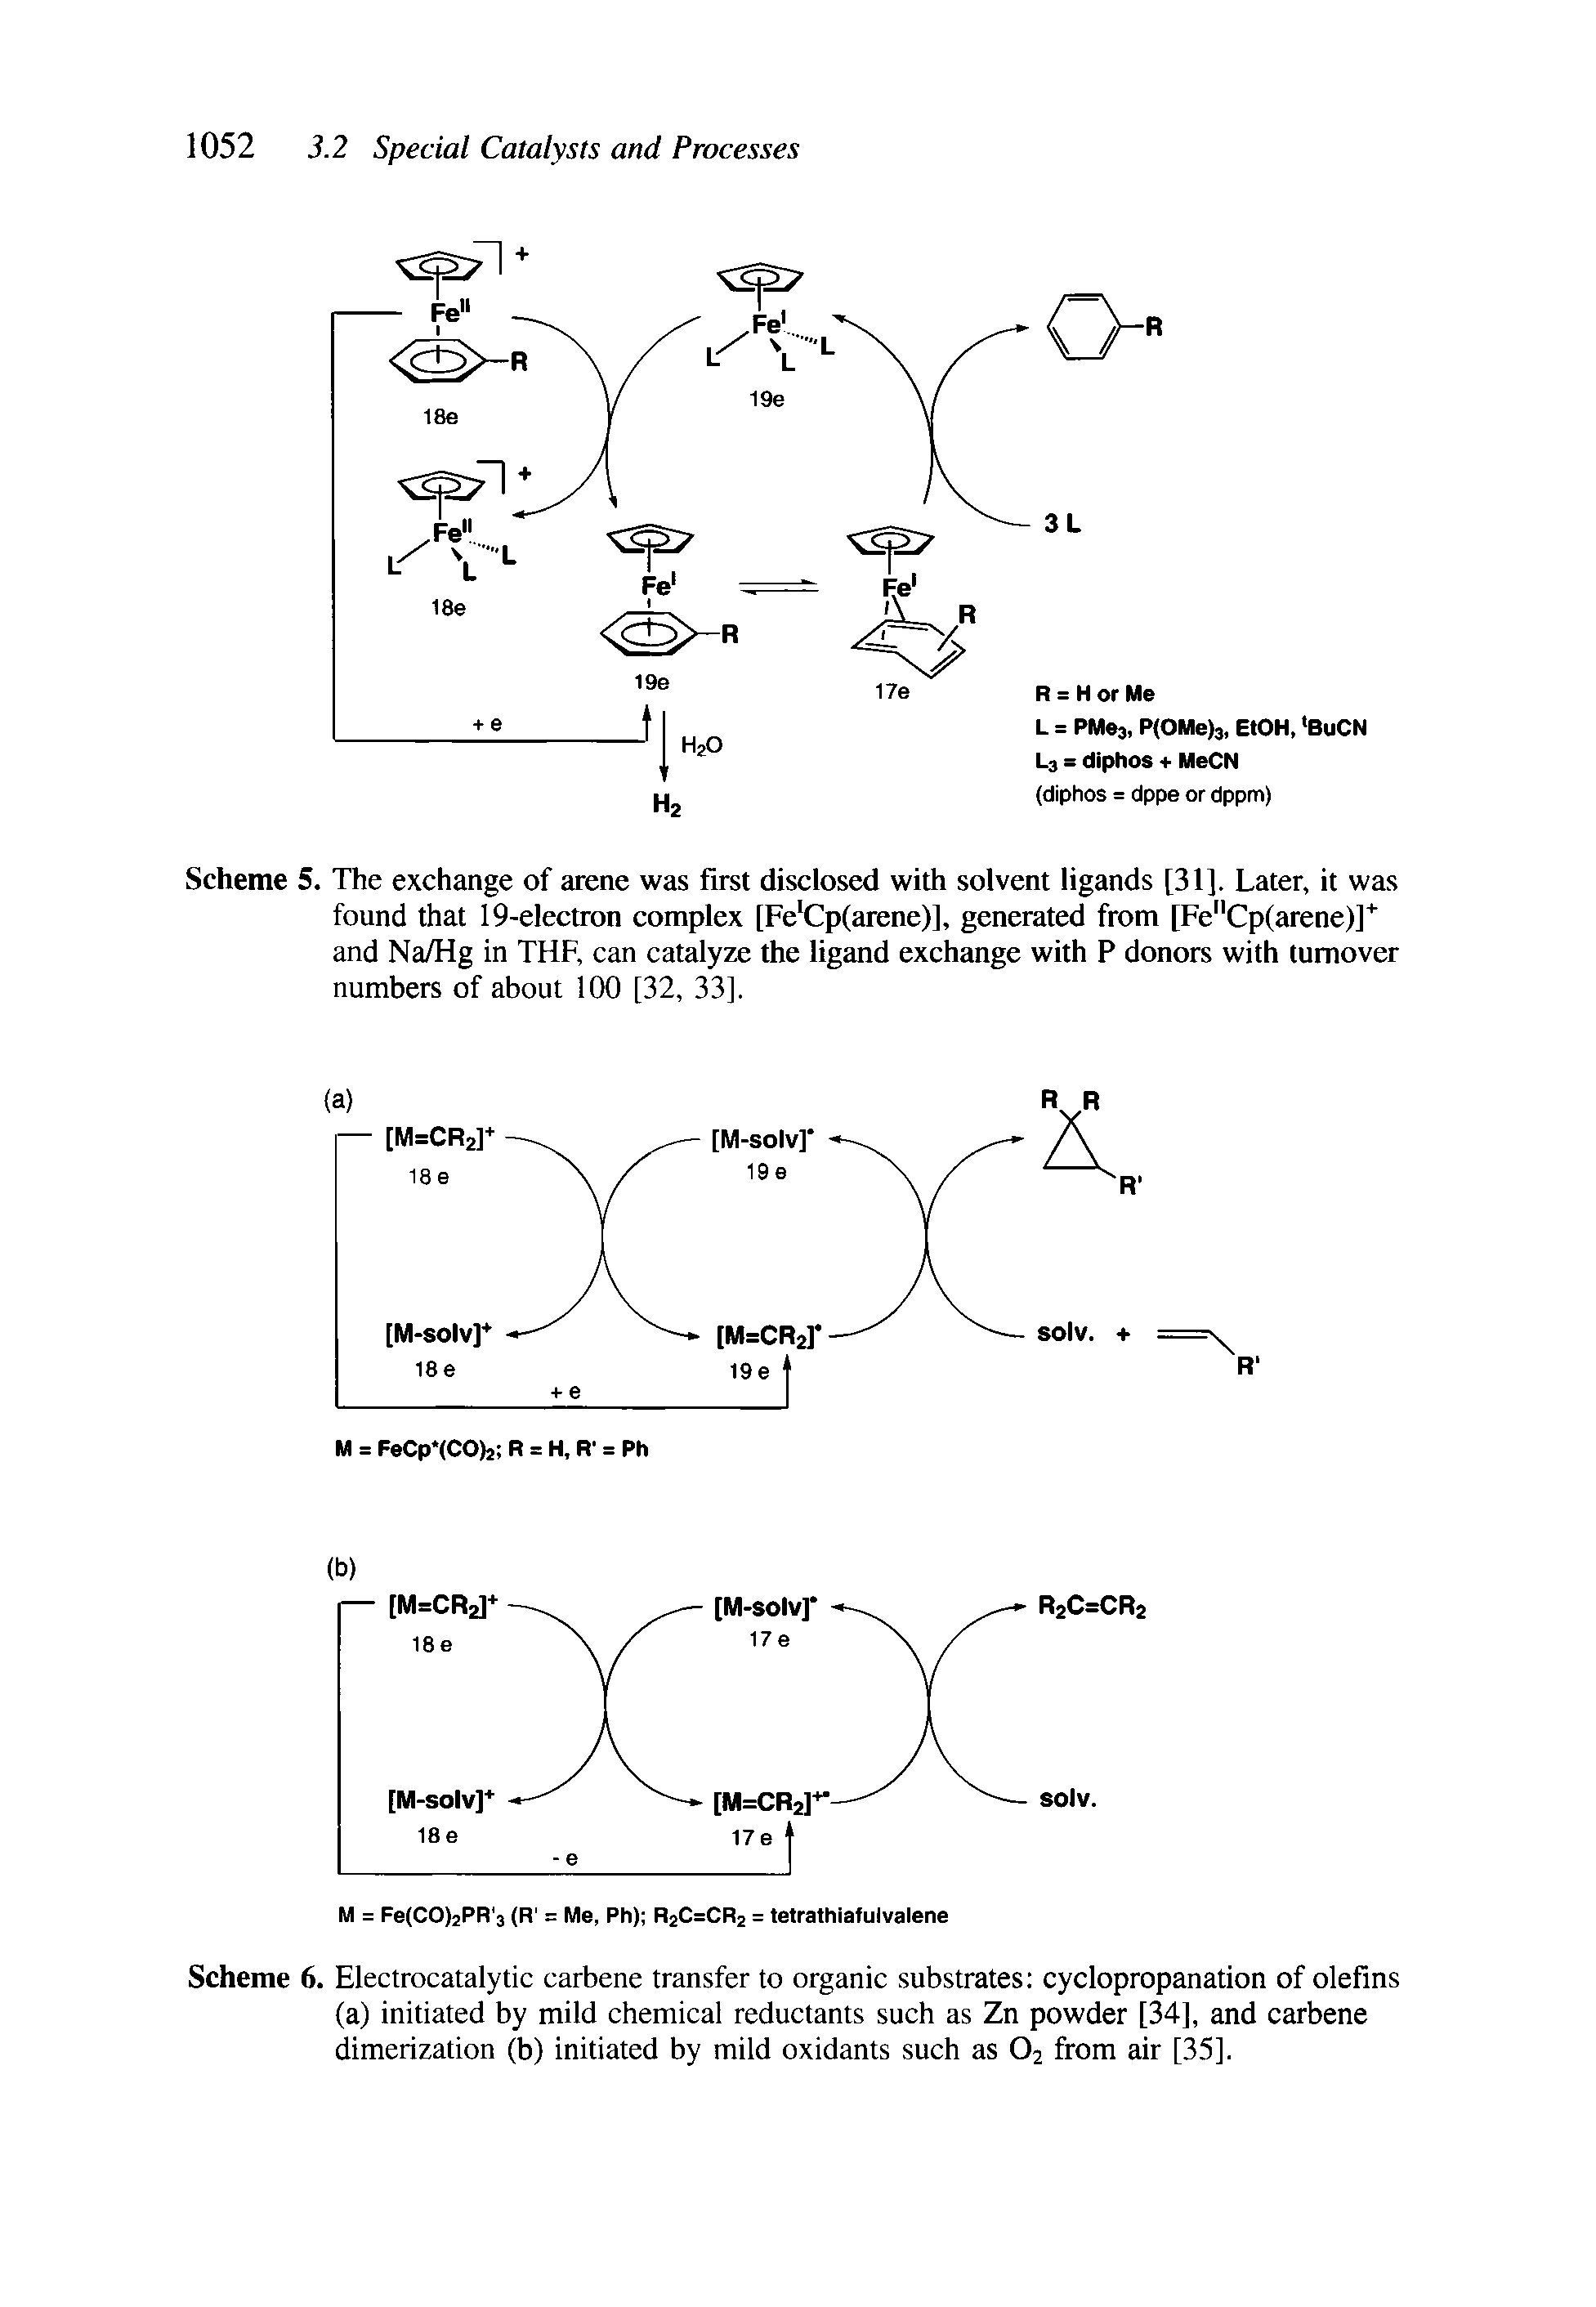 Scheme 6. Electrocatalytic carbene transfer to organic substrates cyclopropanation of olefins (a) initiated by mild chemical reductants such as Zn powder [34], and carbene dimerization (b) initiated by mild oxidants such as O2 from air [35].